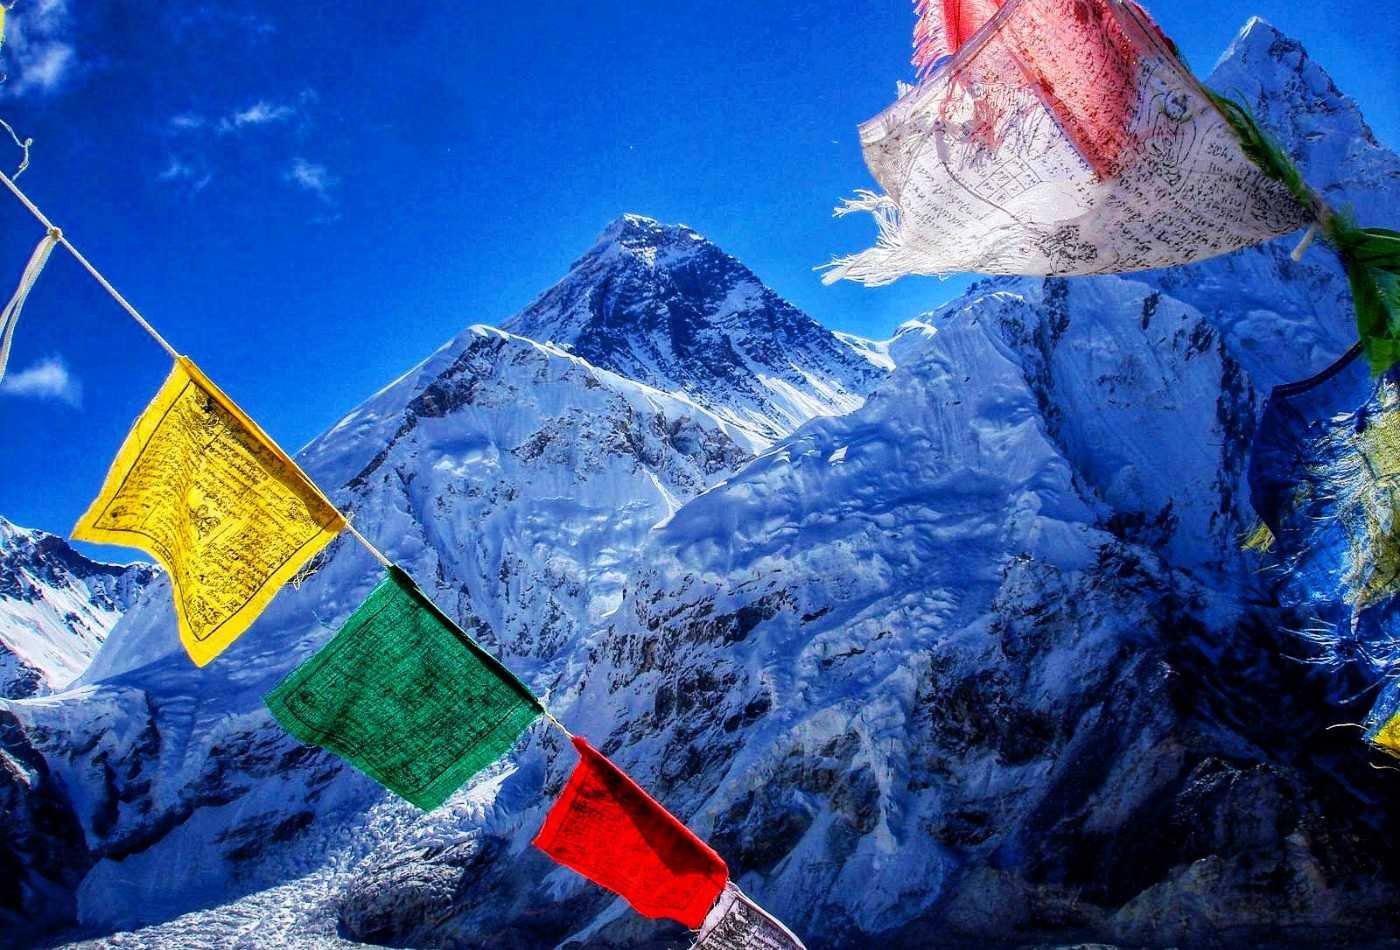 View of Mount Everest from Kalapatthar viewpoint, with prayer flags fluttering in the wind in the foreground.